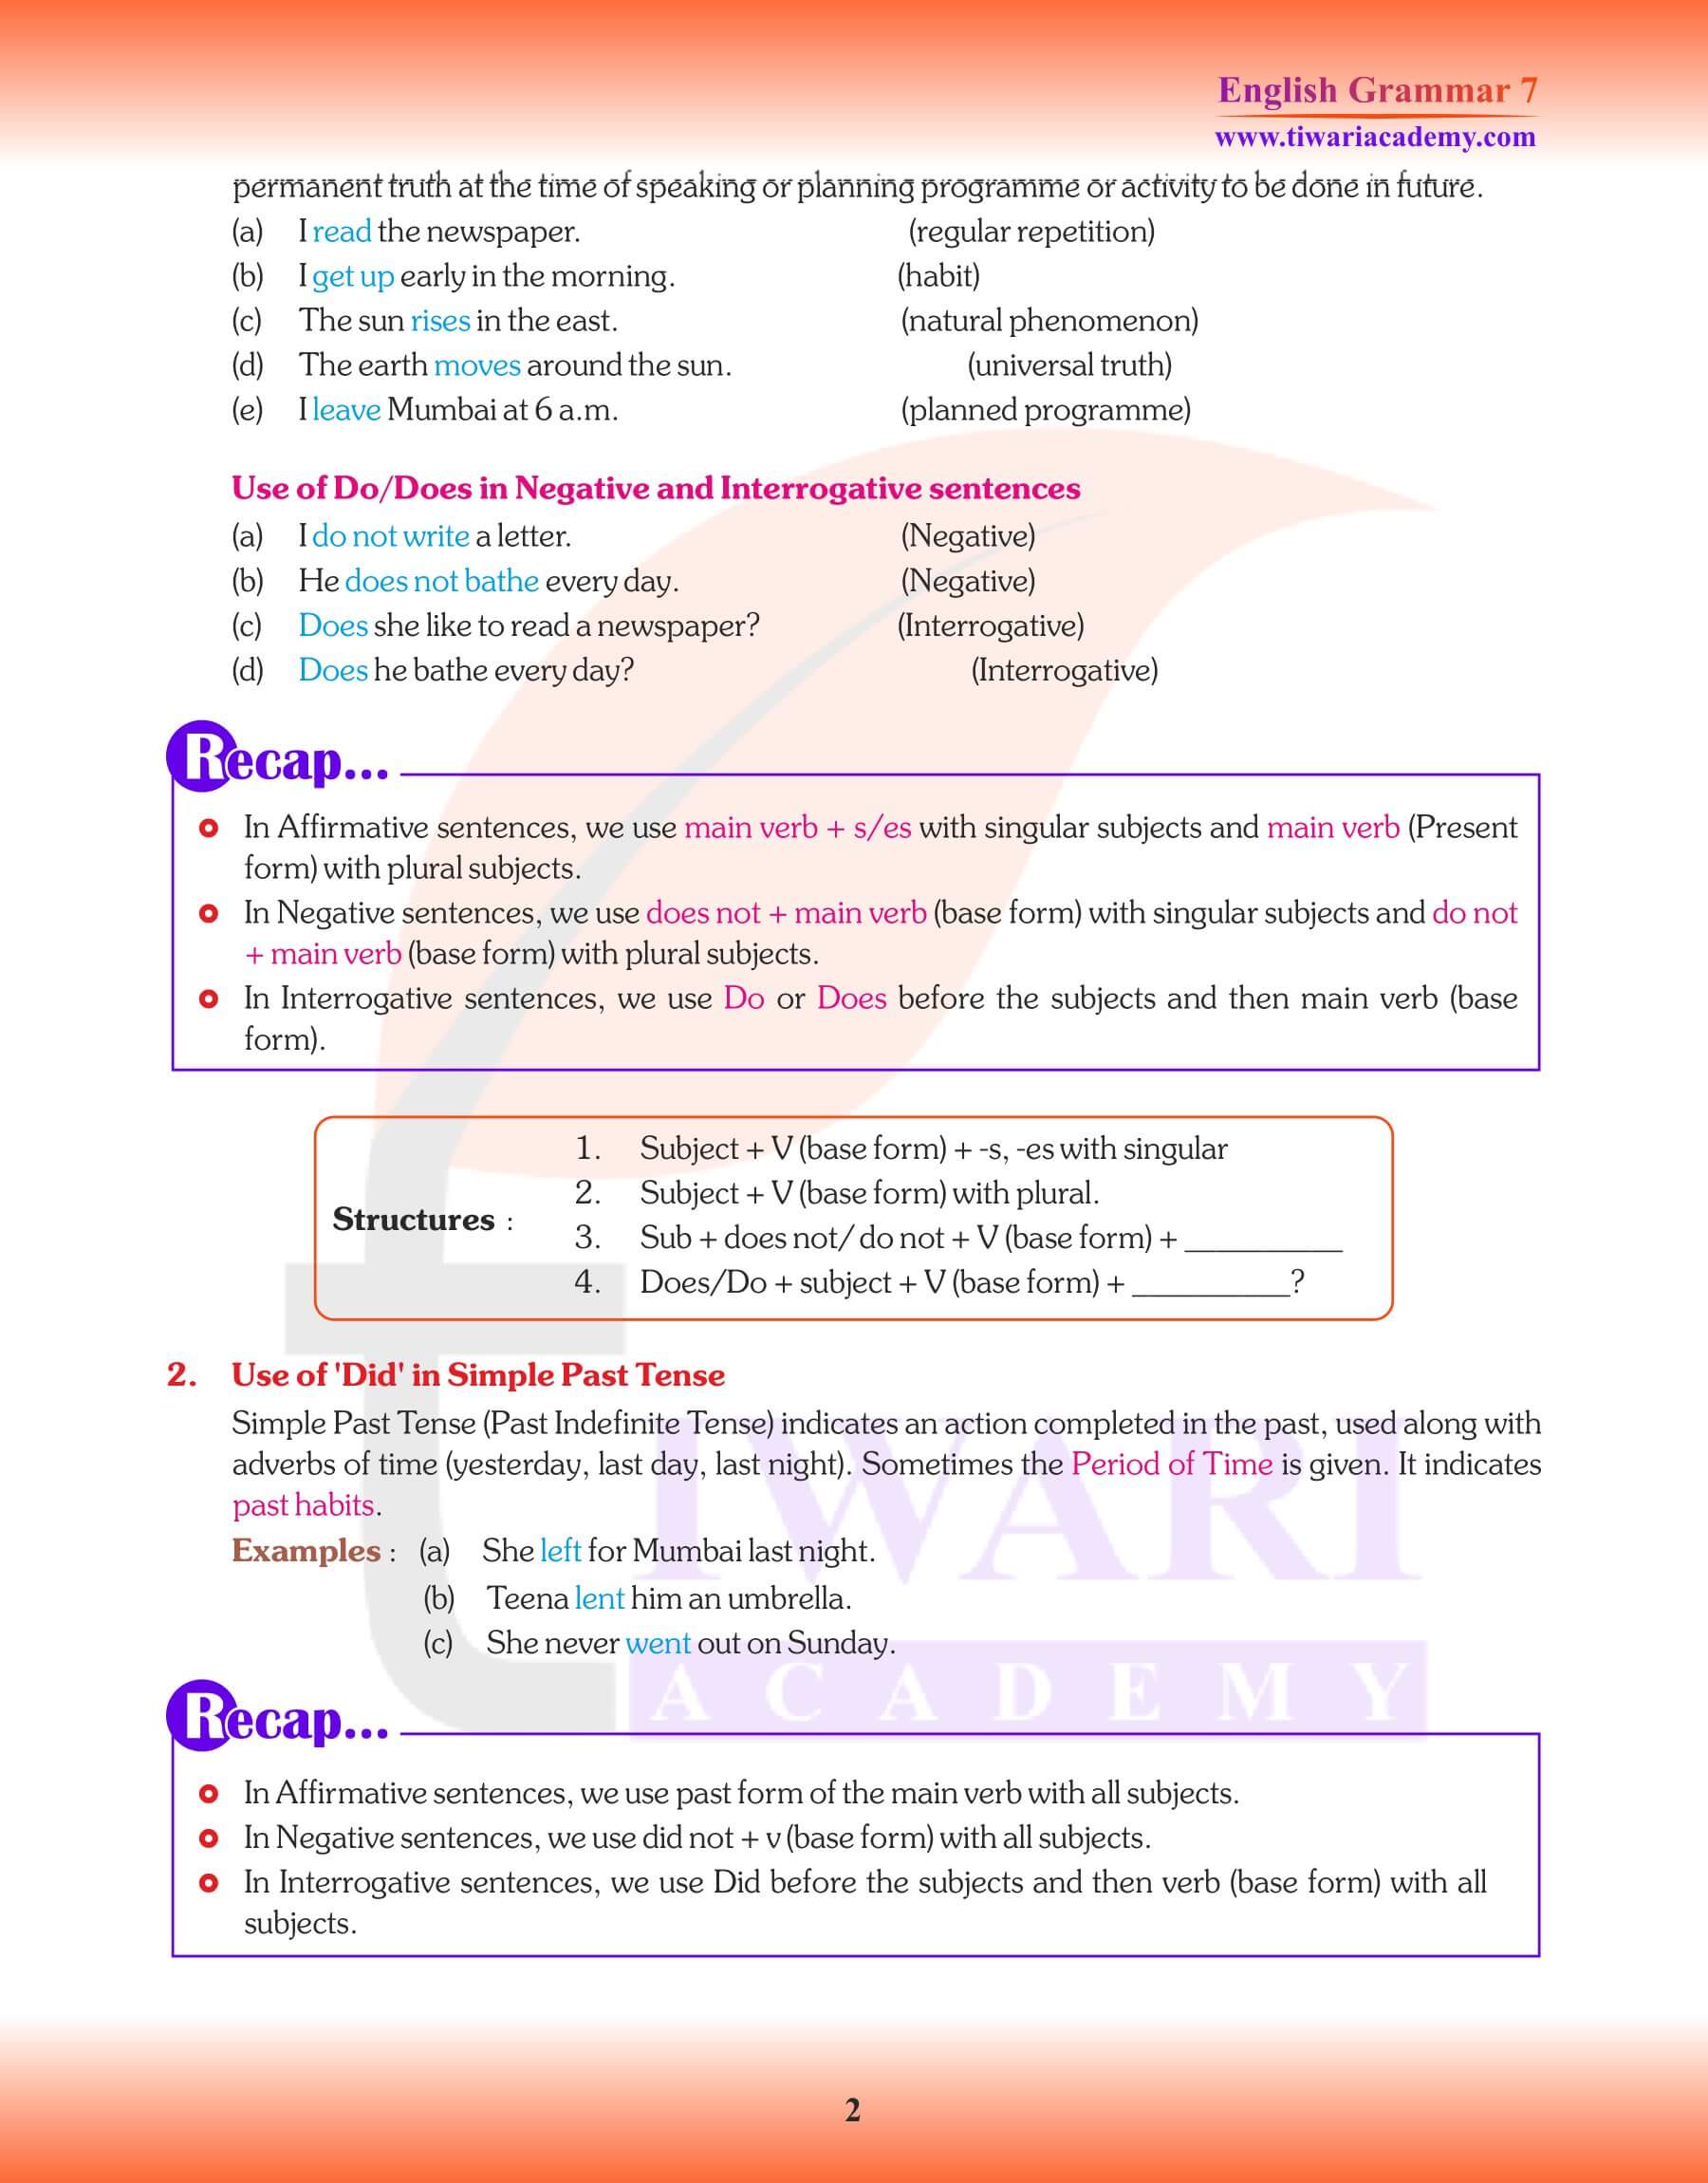 Class 7 English Grammar Chapter 11 Revision Notes